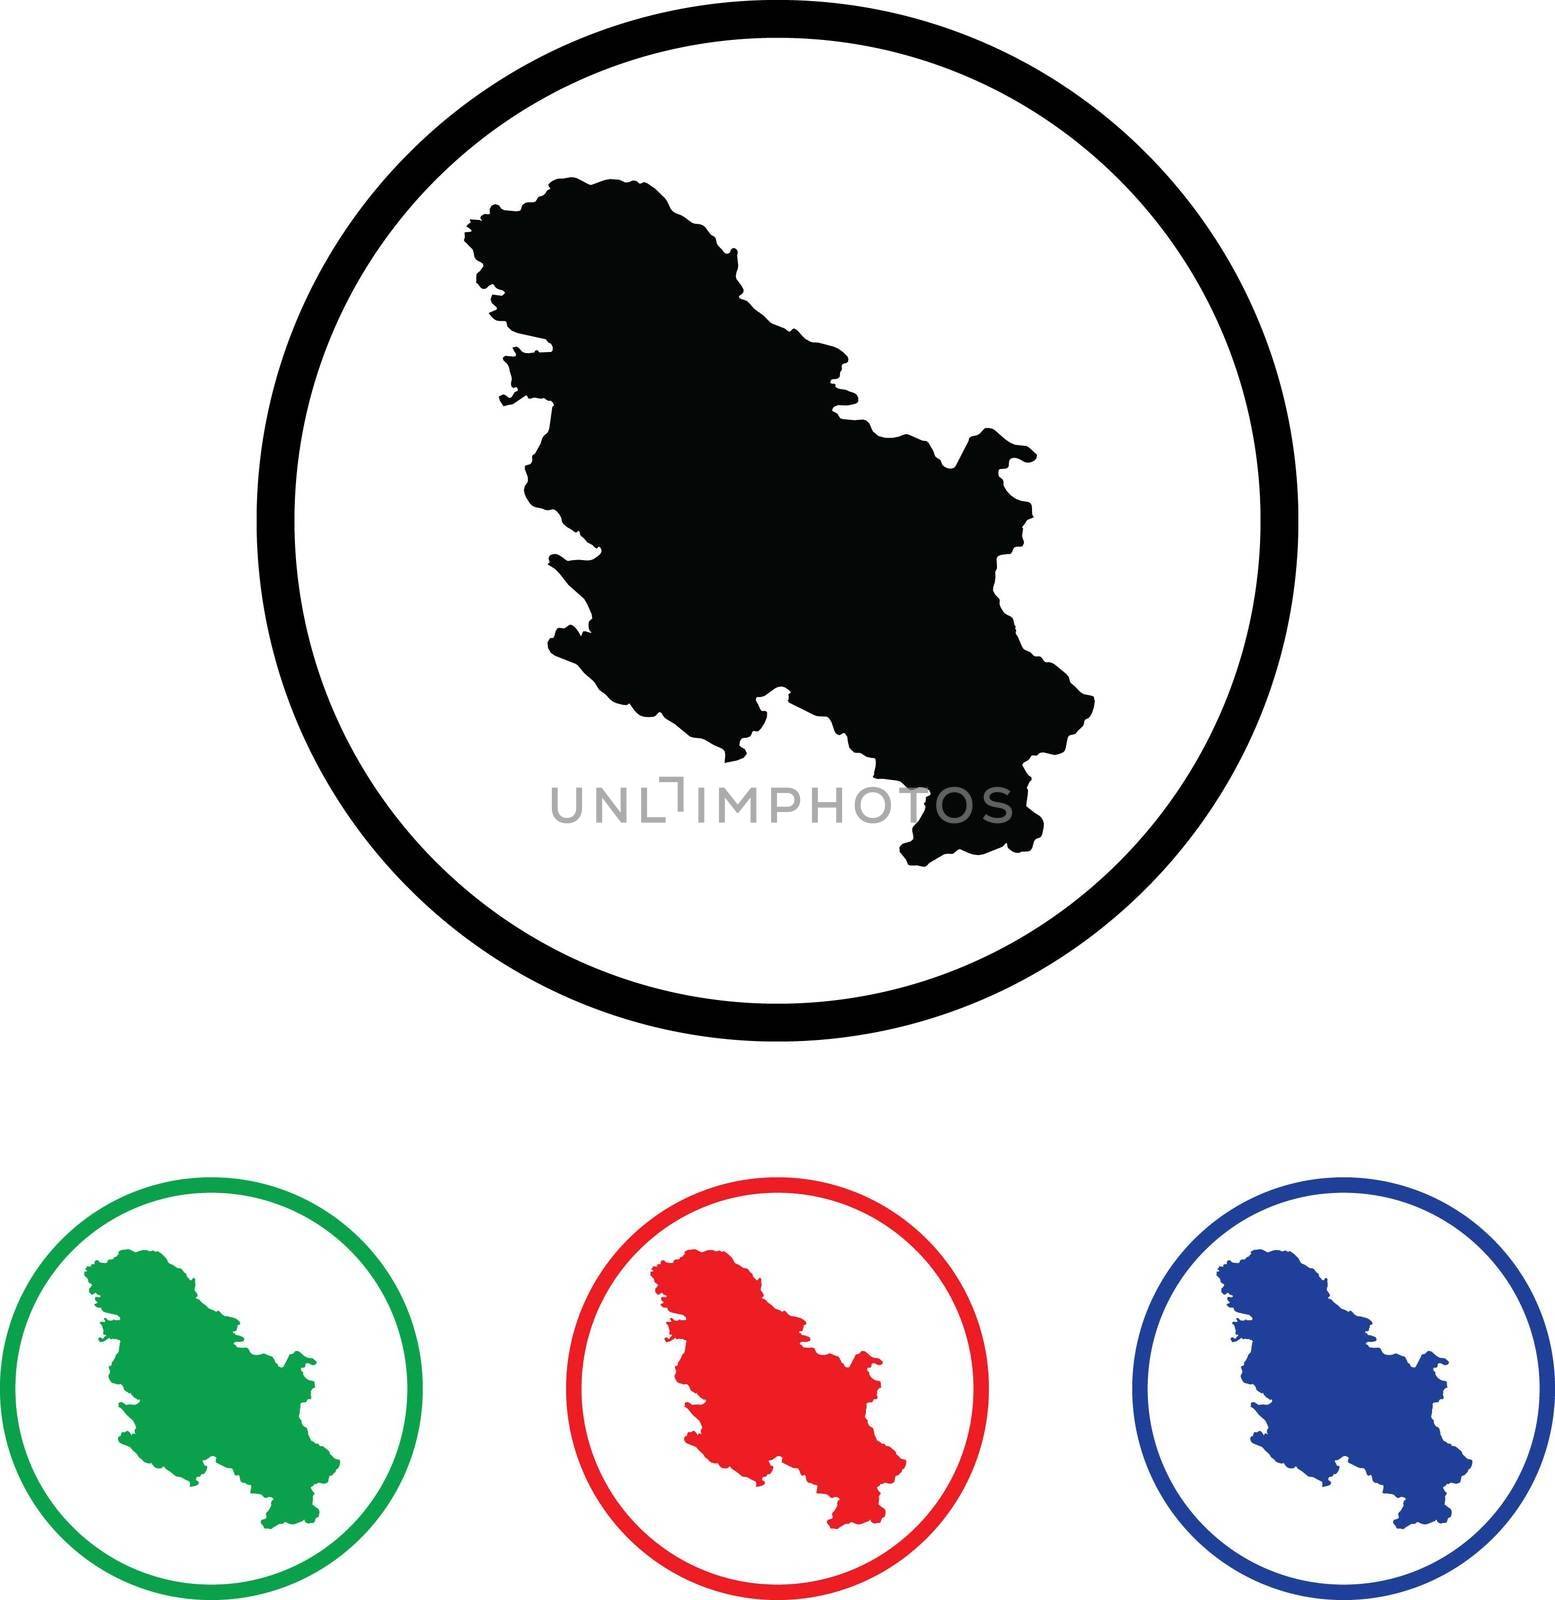 Serbia Icon Illustration with Four Color Variations